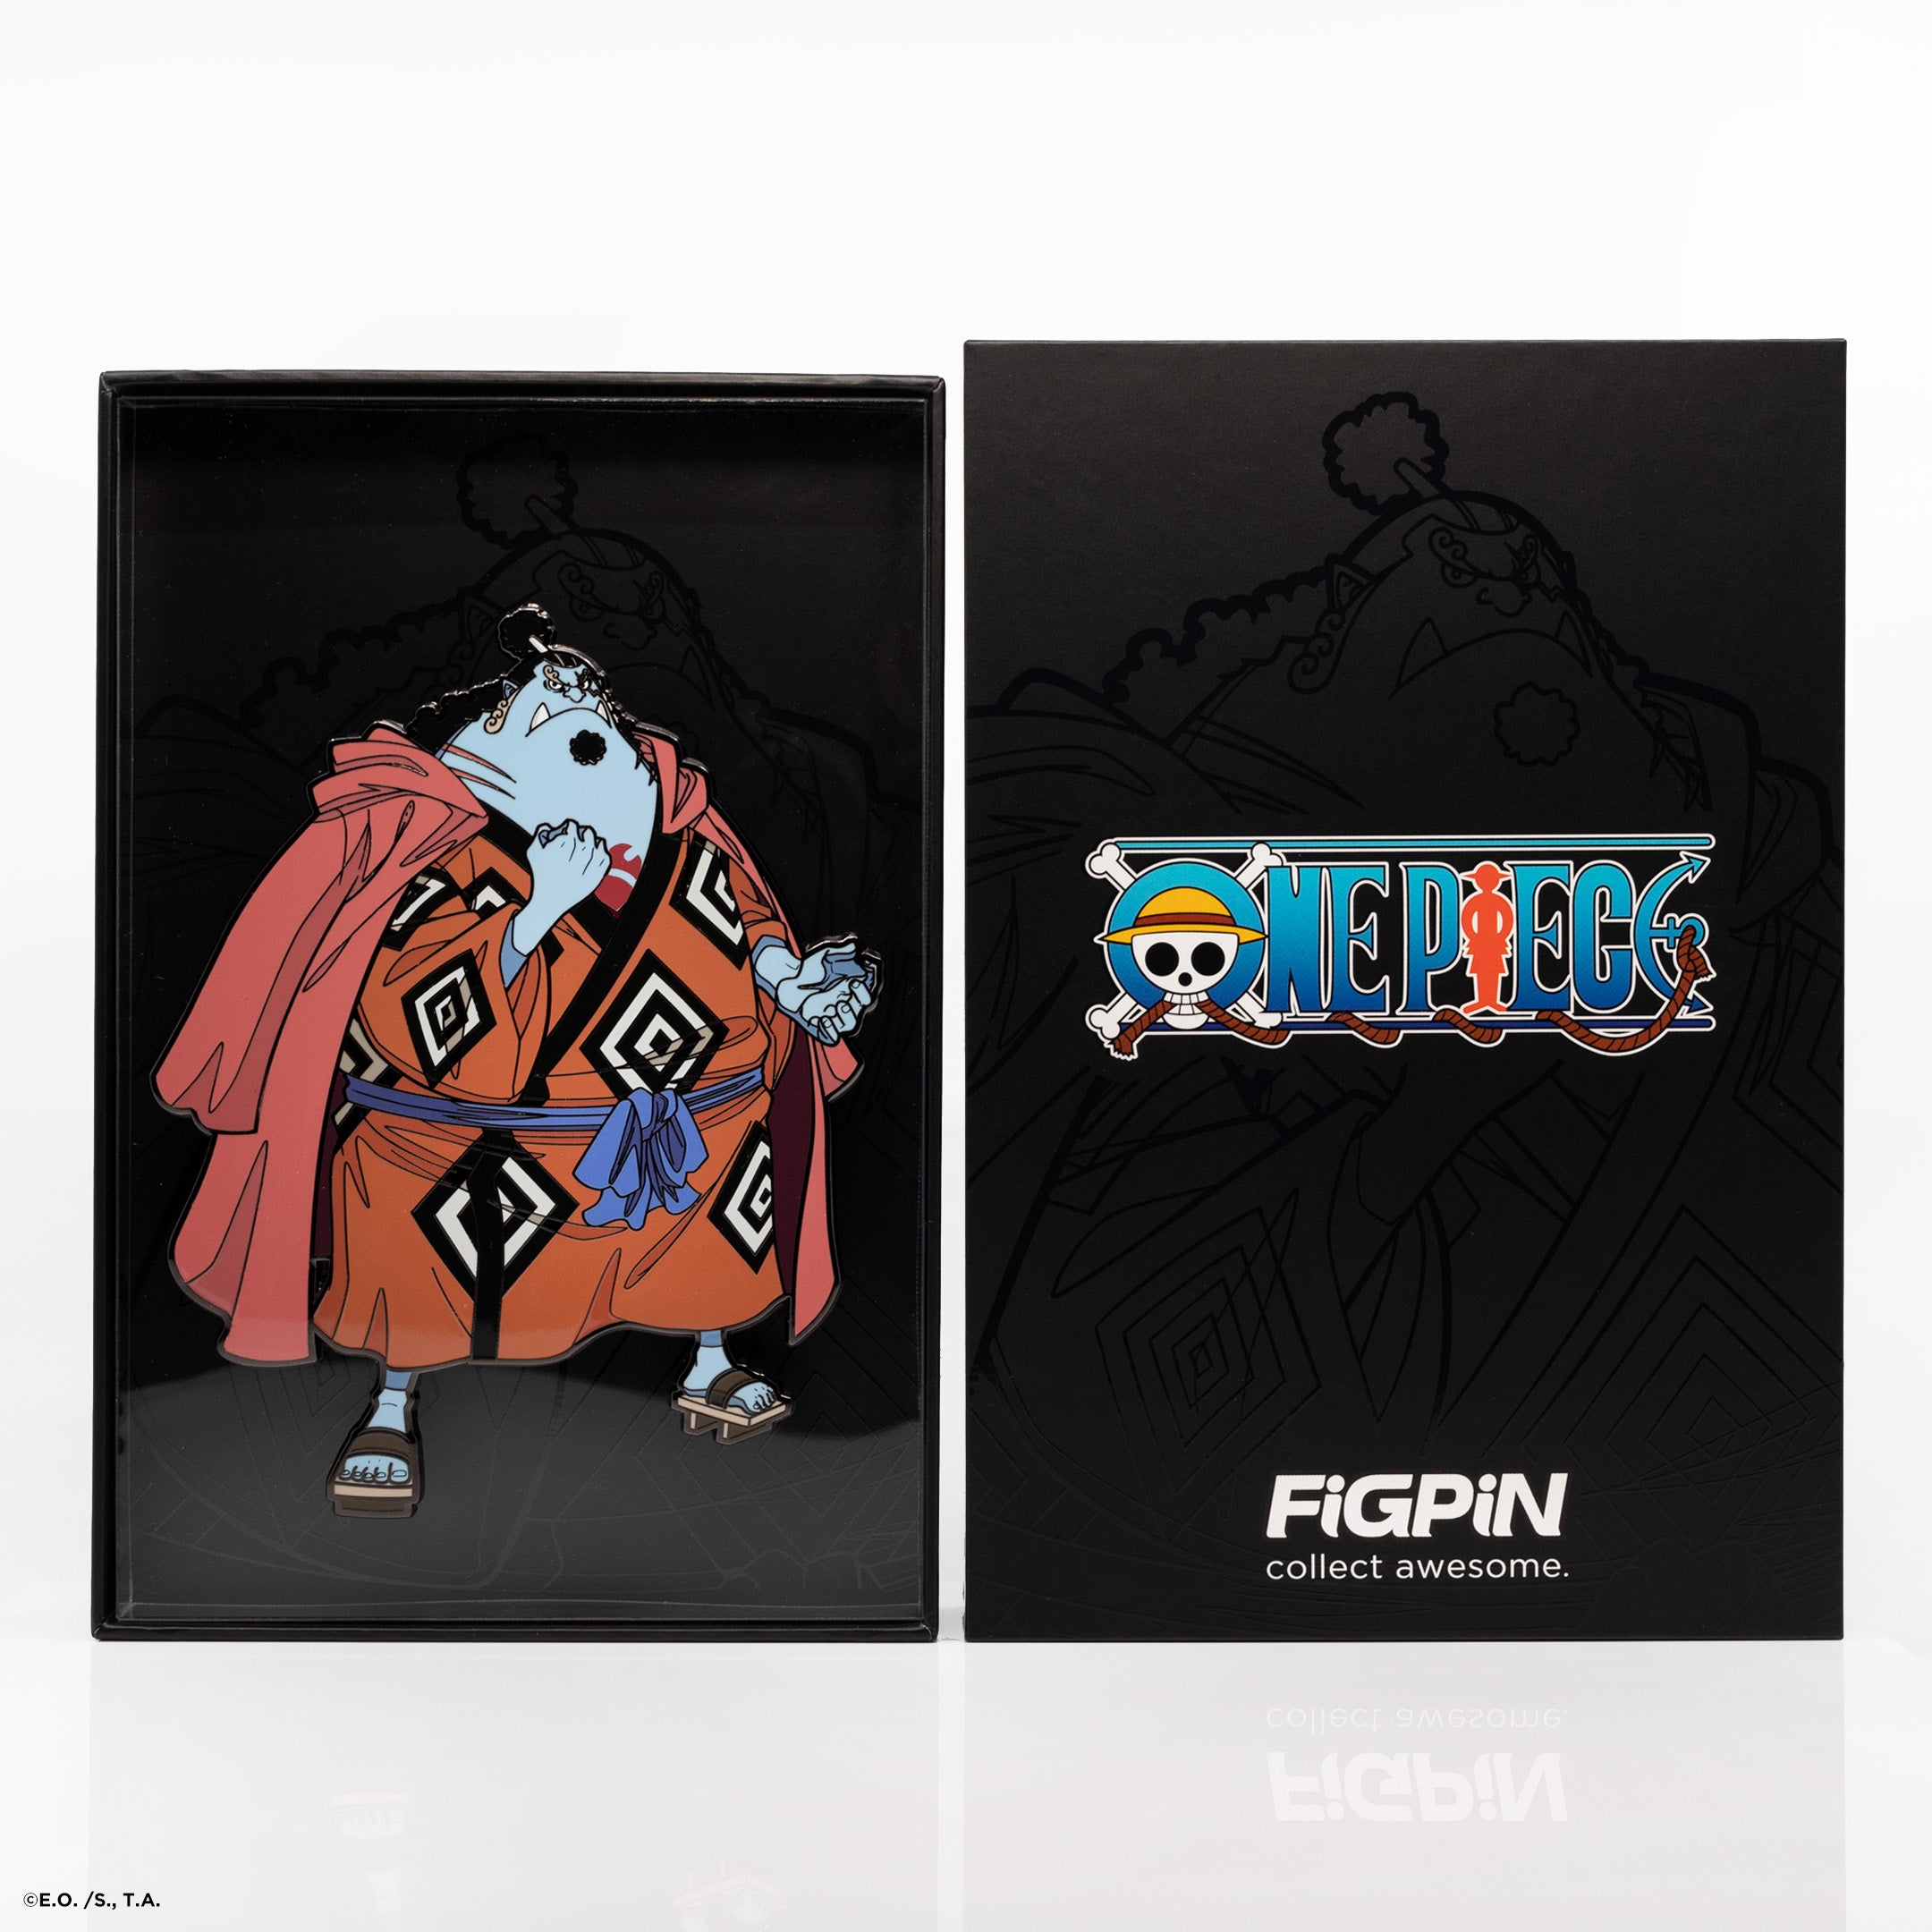 FiGPiN’s One Piece collection expands with a BRAND NEW XL!